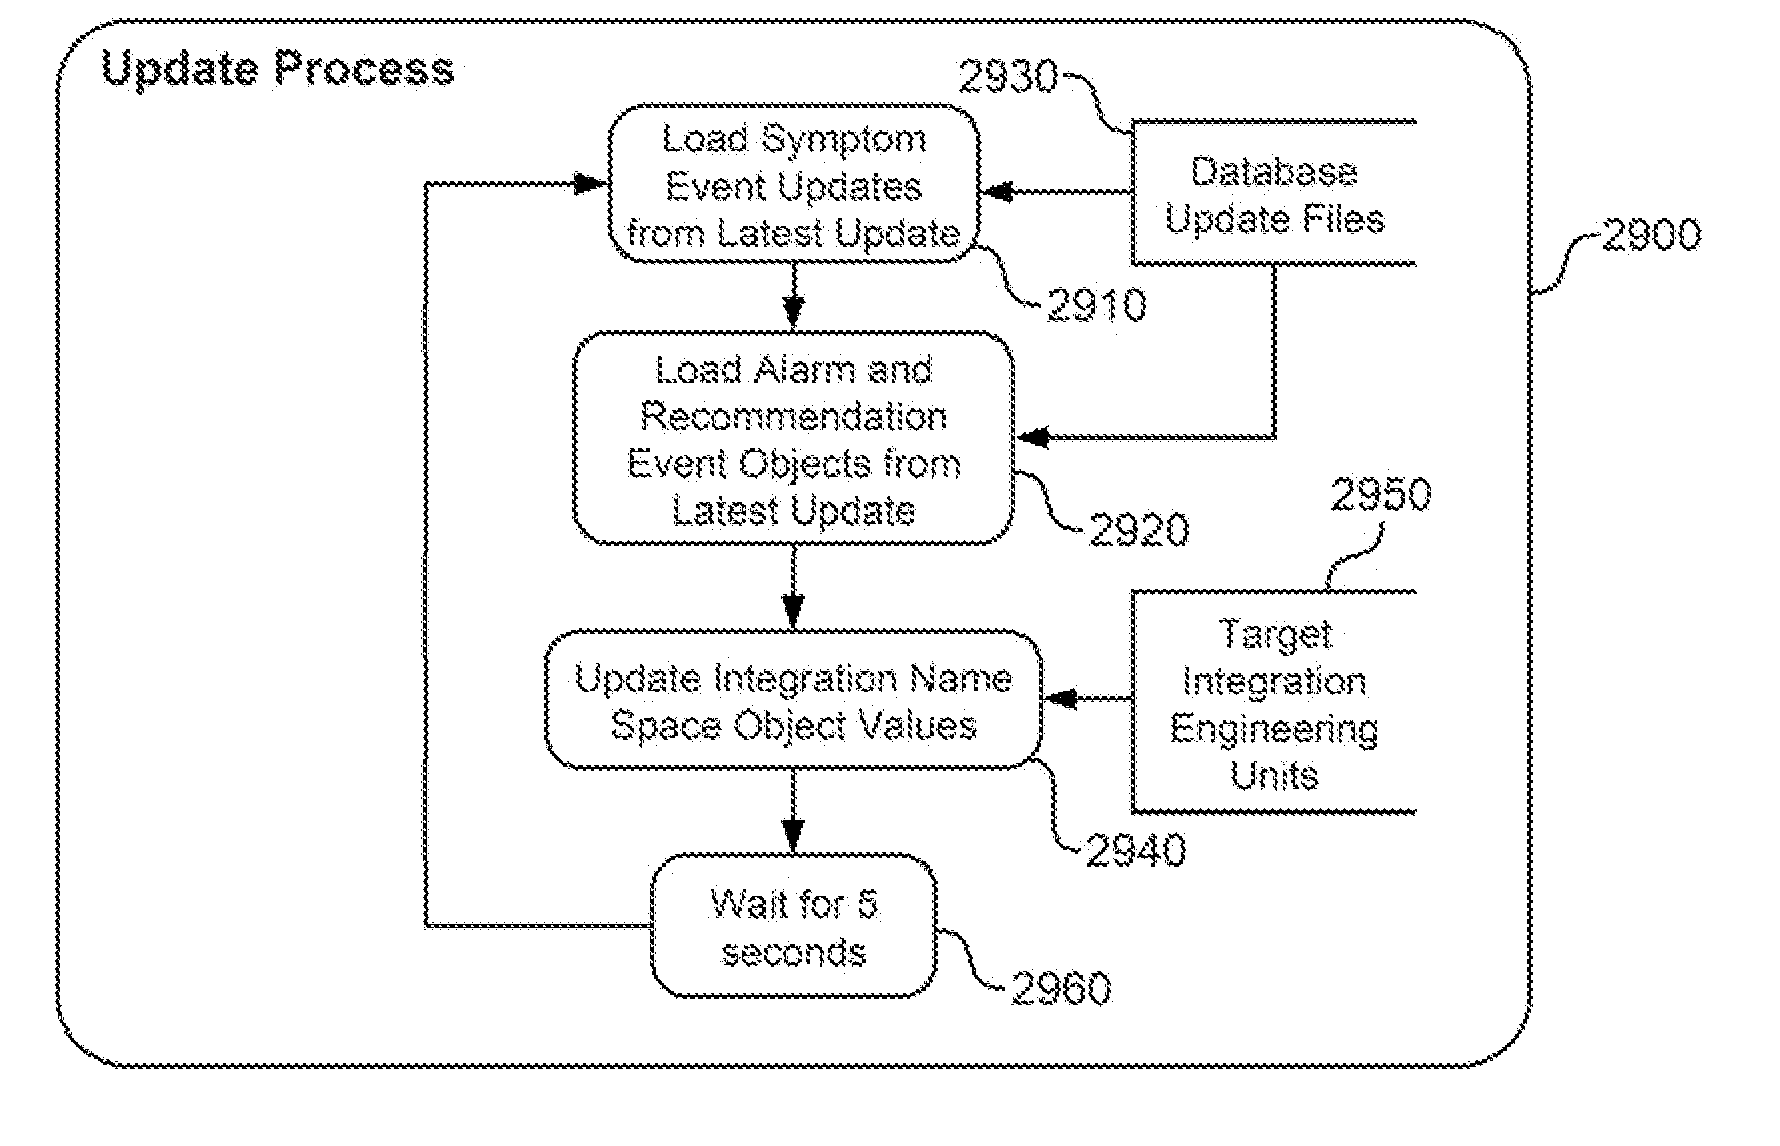 Method and System for Monitoring and Reporting Equipment Operating Conditions and Diagnostic Information